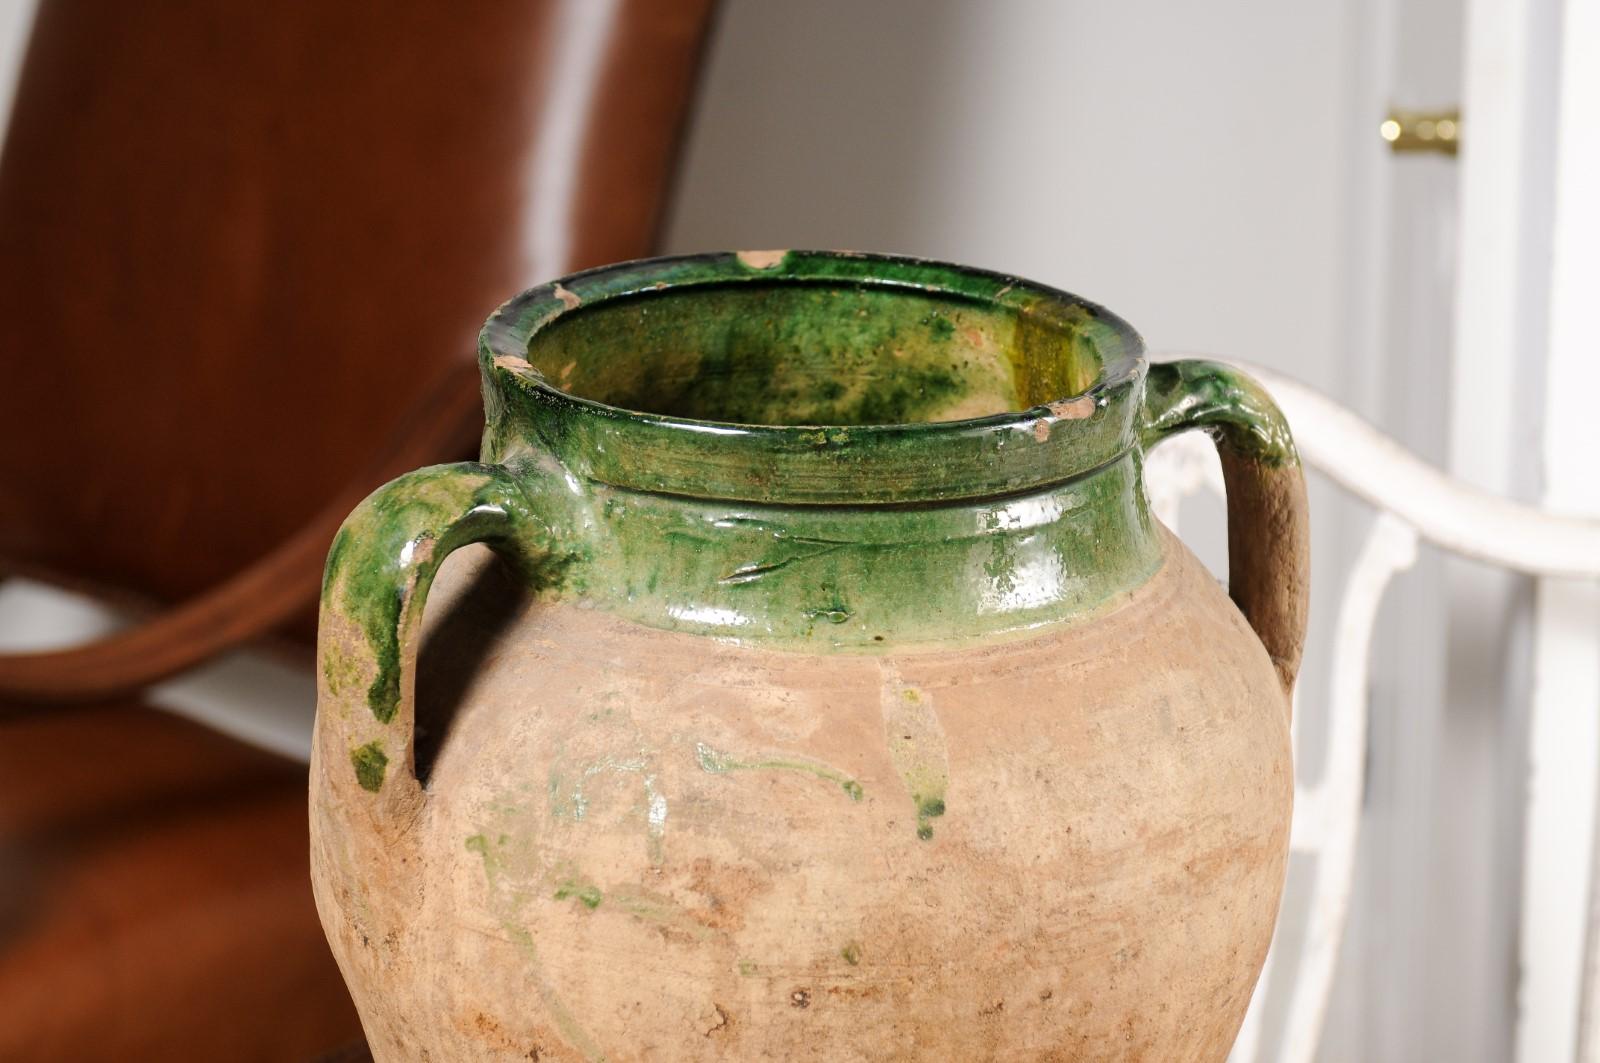 English Rustic 1930s Terracotta Olive Oil Jar Circa 1930 with Green Glazed Top In Good Condition For Sale In Atlanta, GA